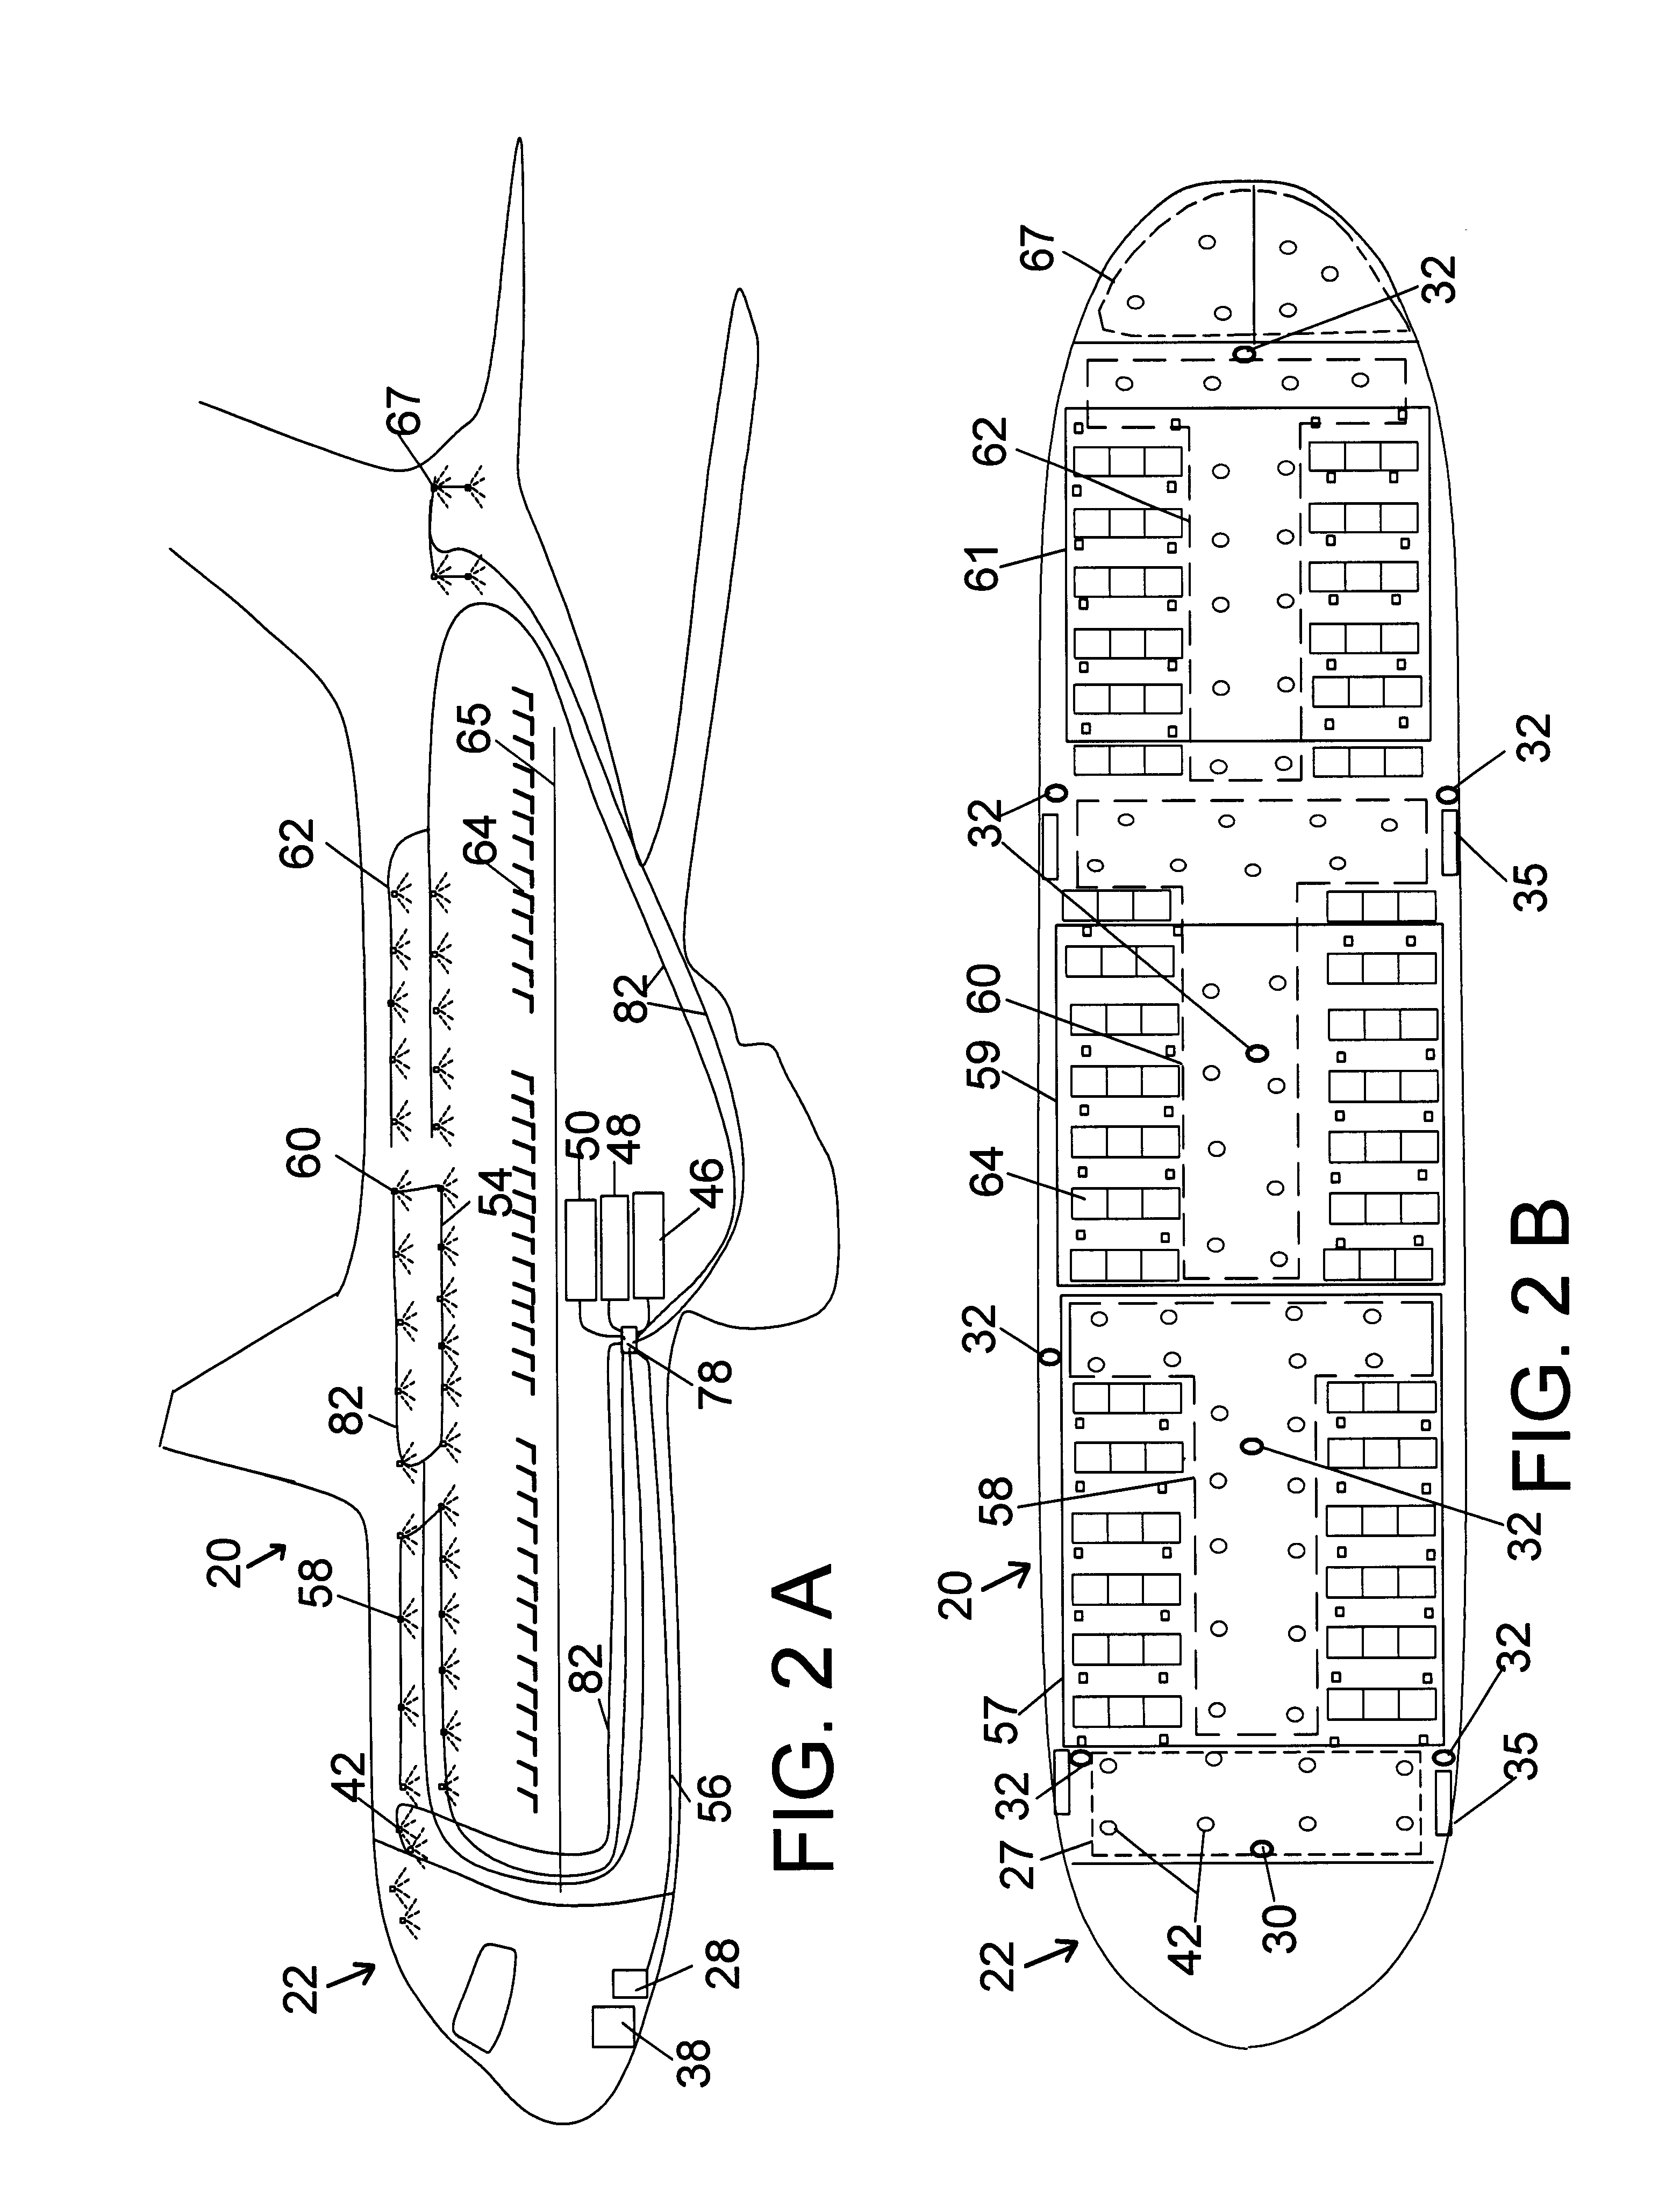 Method and system for countering hostile activity aboard an airplane